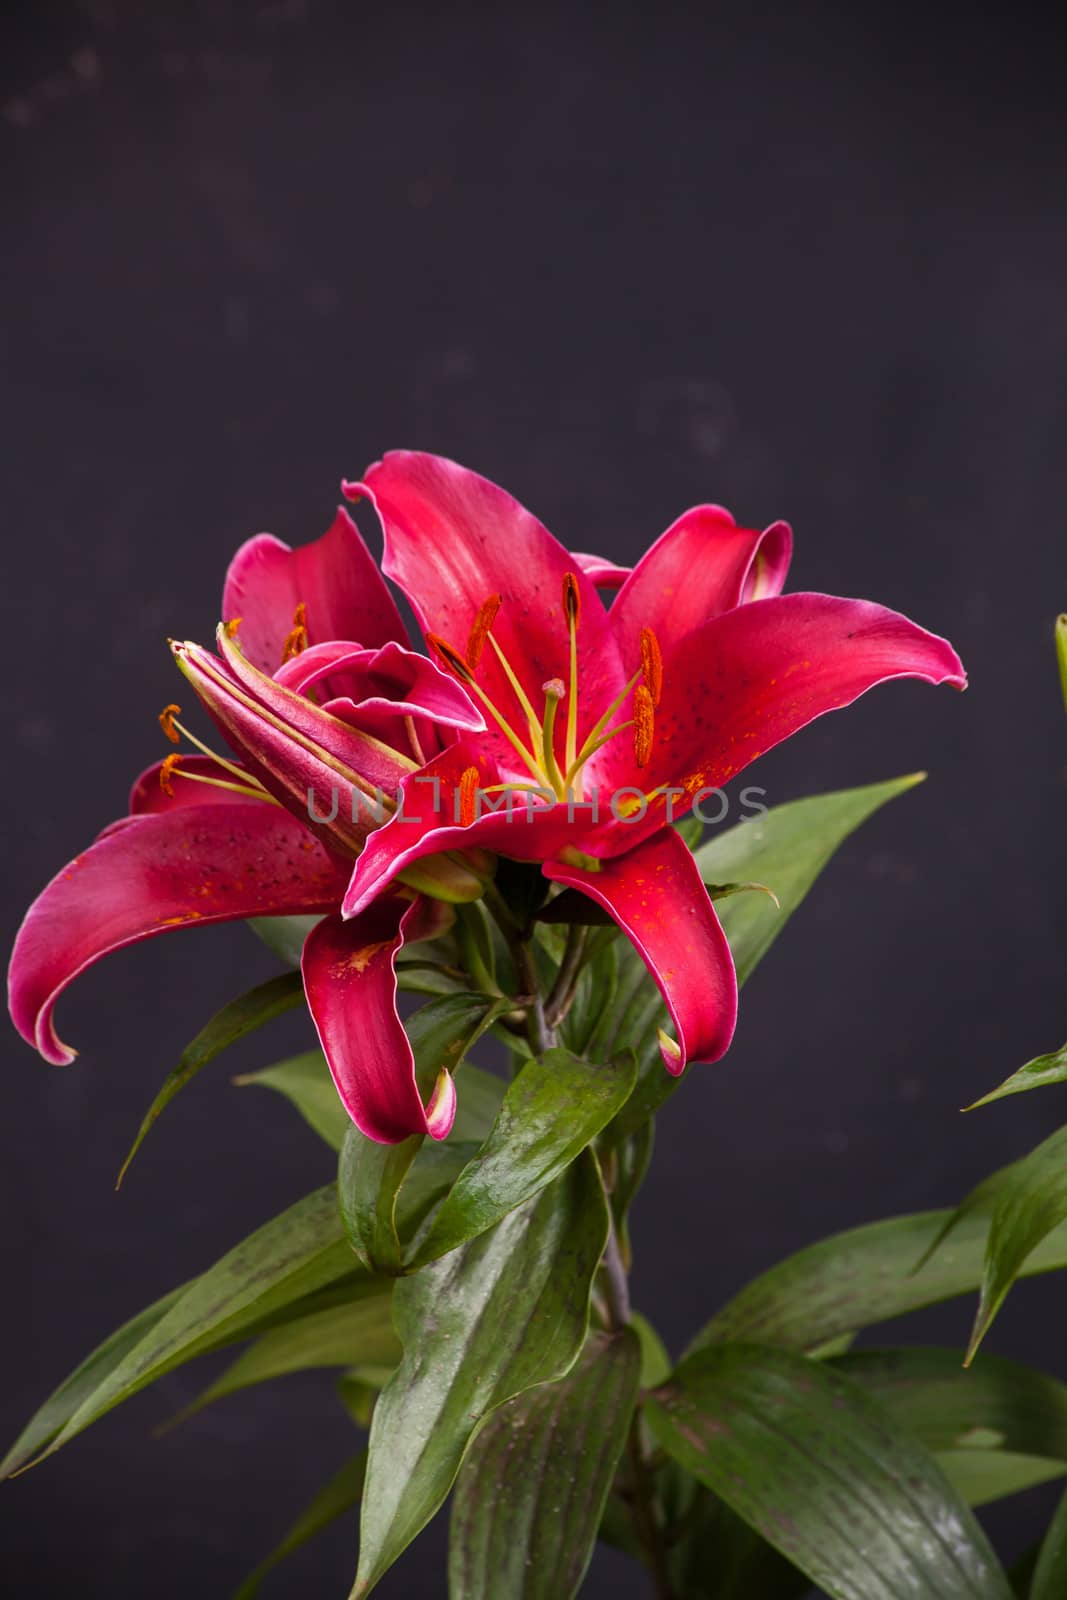 Red Oriental Lily 3 by kobus_peche